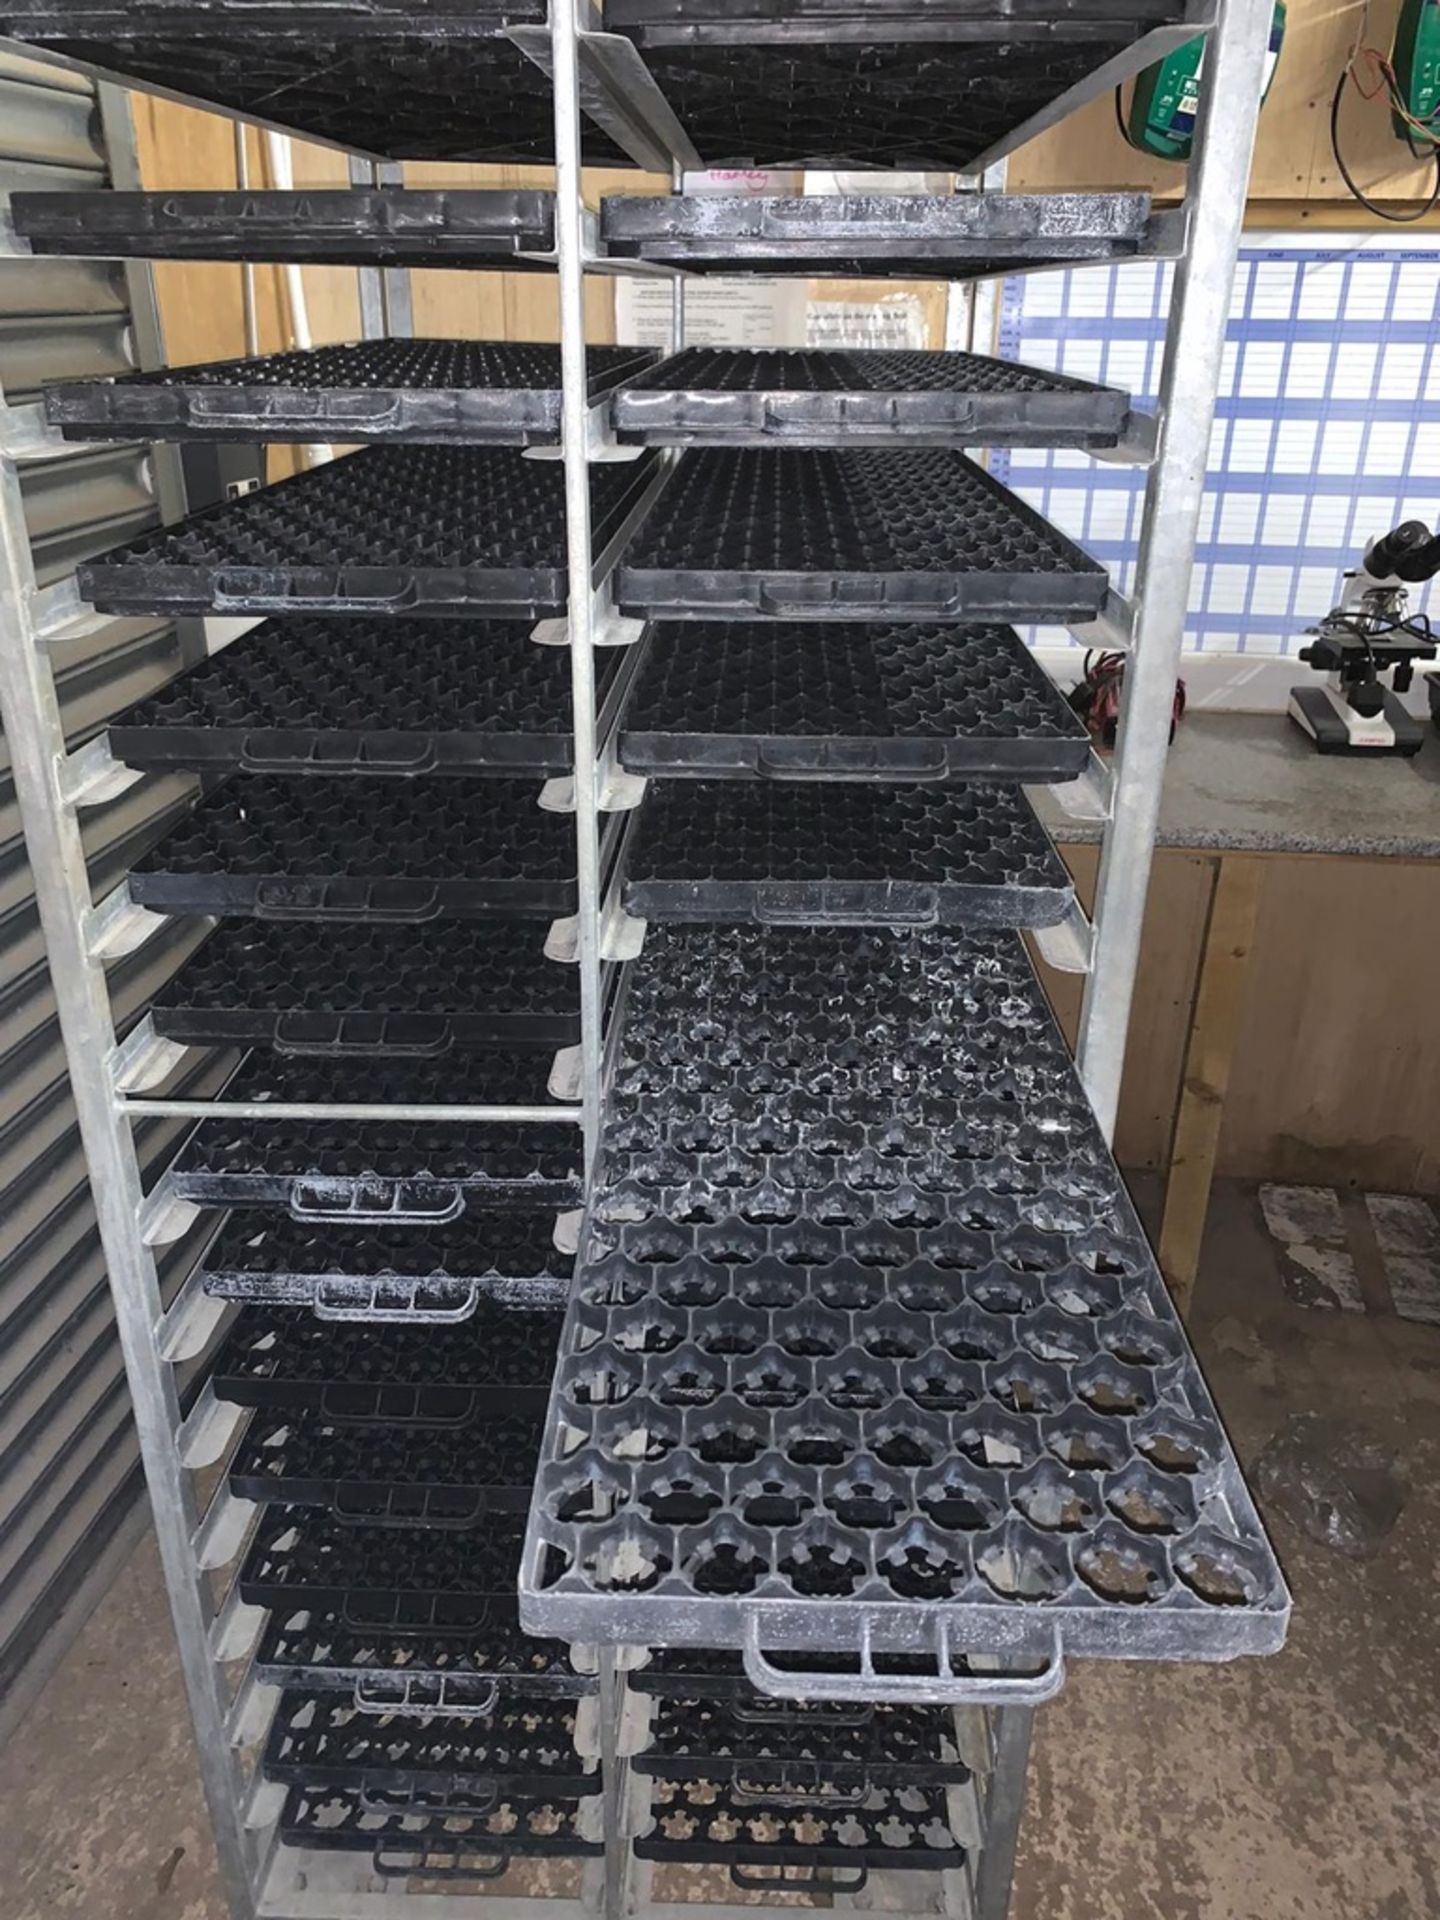 30 Insert tray holder complete with trays